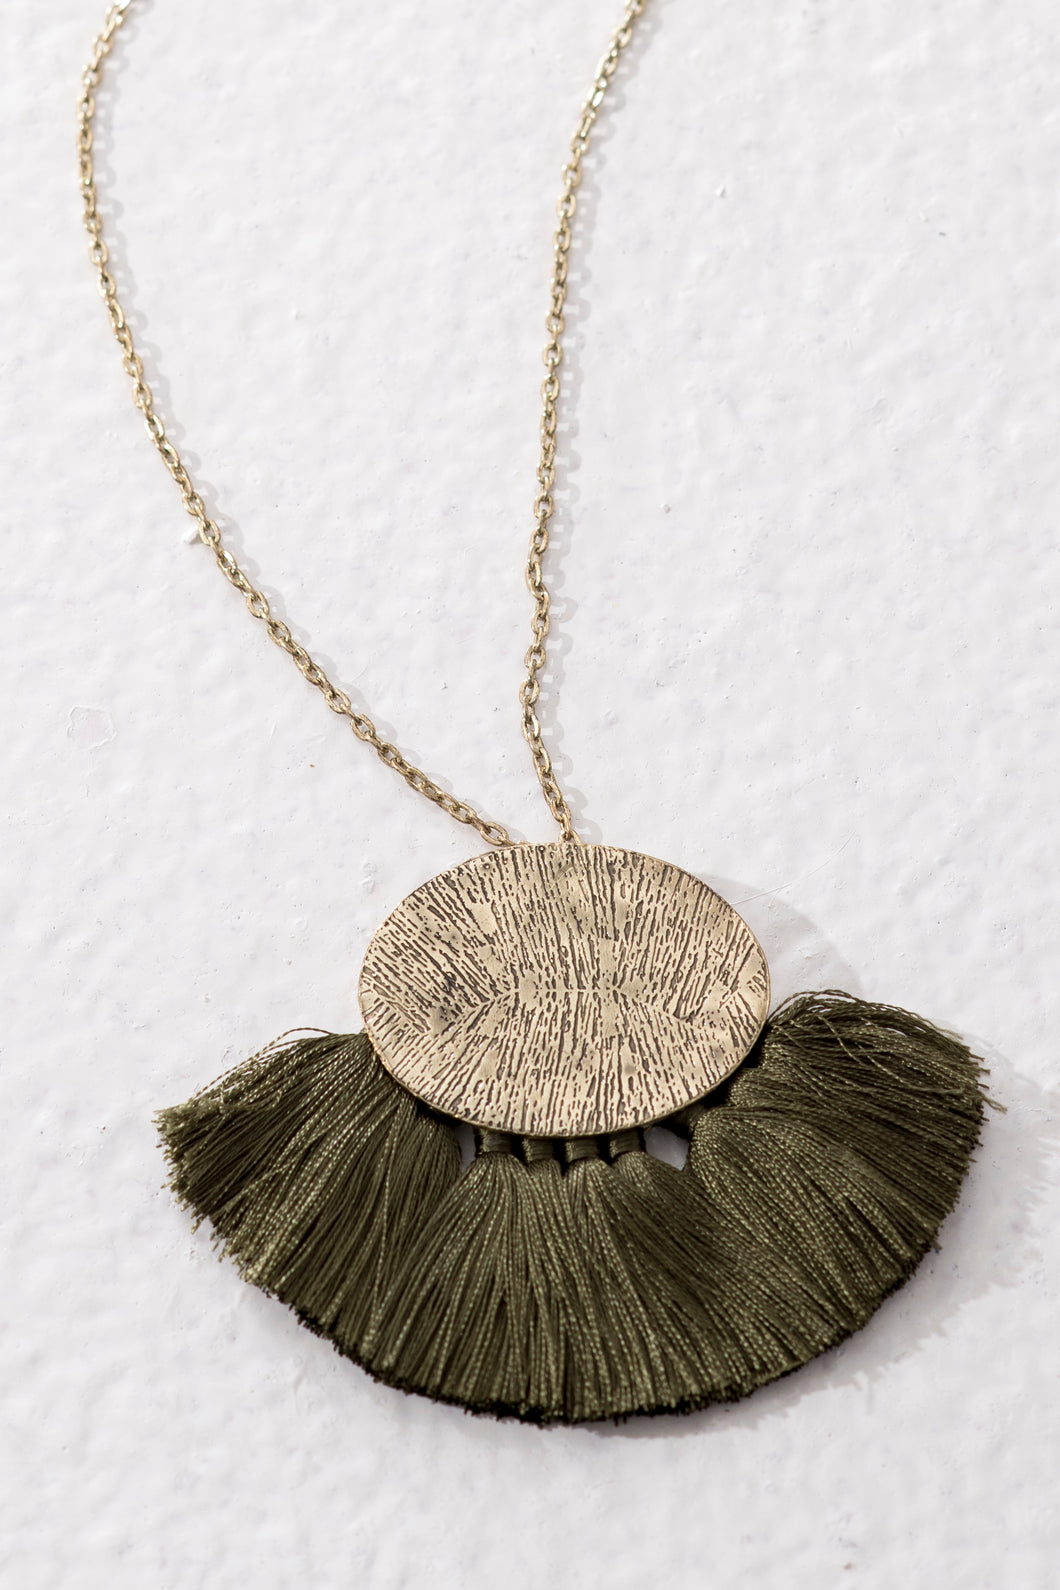 Handmade fair trade jewellery with long chain and textured golden brass pendant. Olive green tassels